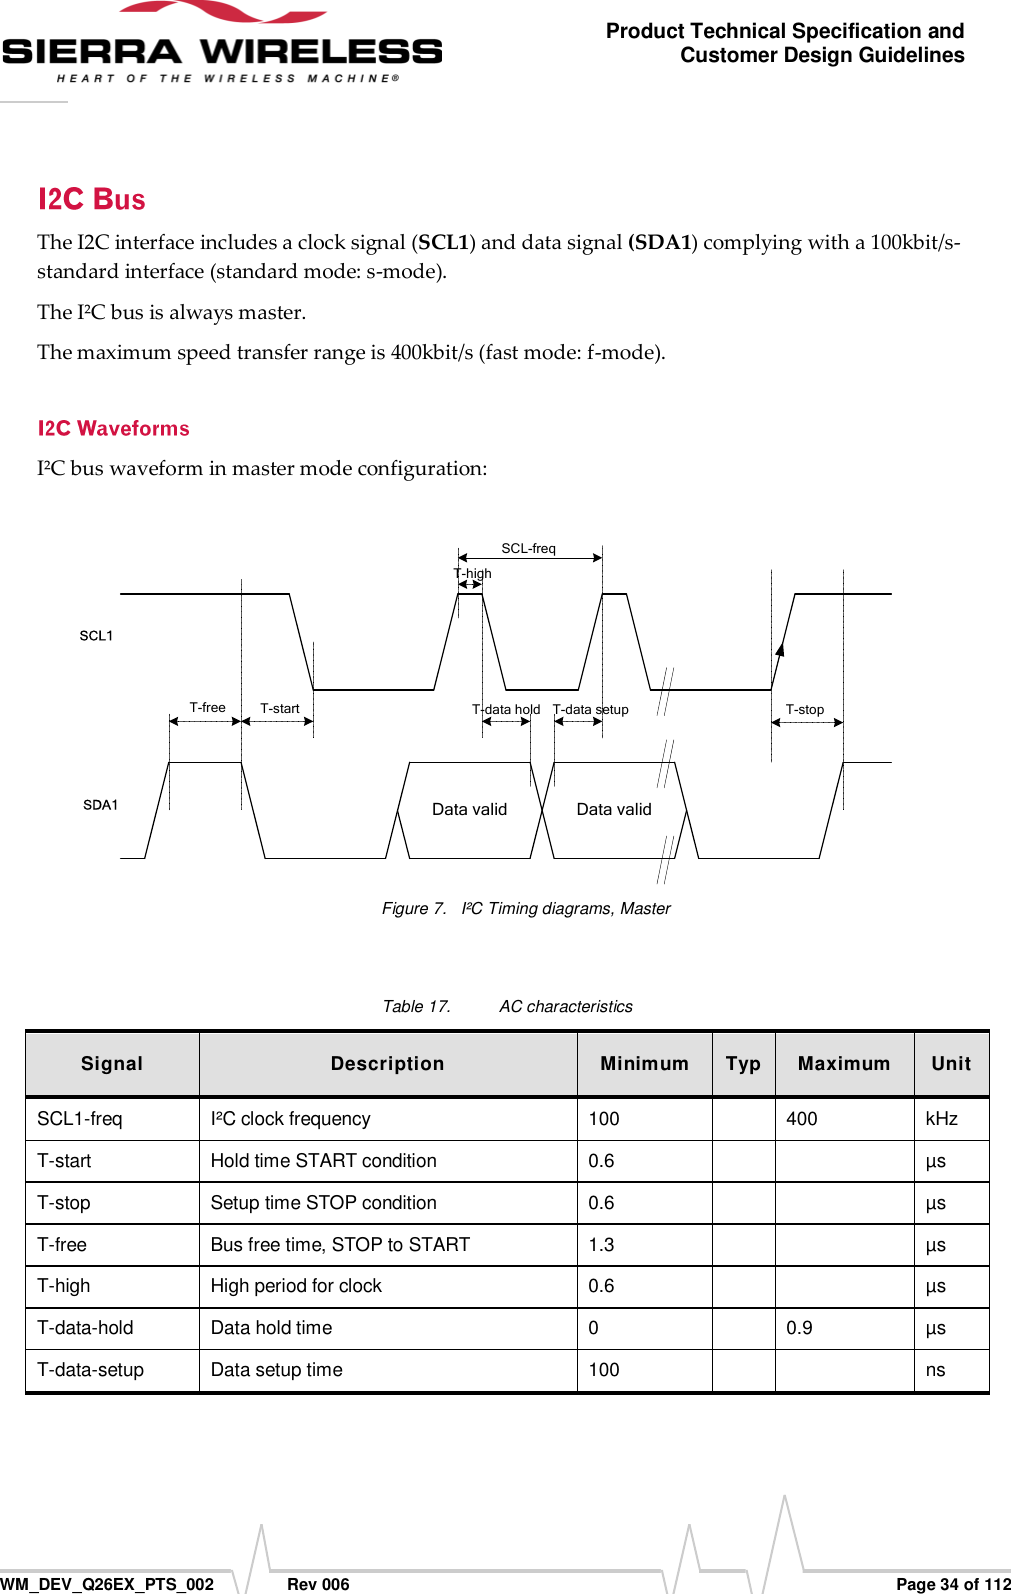      WM_DEV_Q26EX_PTS_002  Rev 006  Page 34 of 112 Product Technical Specification and Customer Design Guidelines The I2C interface includes a clock signal (SCL1) and data signal (SDA1) complying with a 100kbit/s-standard interface (standard mode: s-mode).  The I²C bus is always master. The maximum speed transfer range is 400kbit/s (fast mode: f-mode).  I²C bus waveform in master mode configuration:  SCL-freqT-freeSDA1SCL1Data valid Data validT-start T-data hold T-data setupT-highT-stop Figure 7.  I²C Timing diagrams, Master  Table 17.  AC characteristics Signal Description Minimum Typ Maximum Unit SCL1-freq I²C clock frequency 100  400 kHz T-start Hold time START condition 0.6   µs T-stop Setup time STOP condition 0.6   µs T-free Bus free time, STOP to START 1.3   µs T-high High period for clock 0.6   µs T-data-hold Data hold time 0  0.9 µs T-data-setup Data setup time 100   ns  